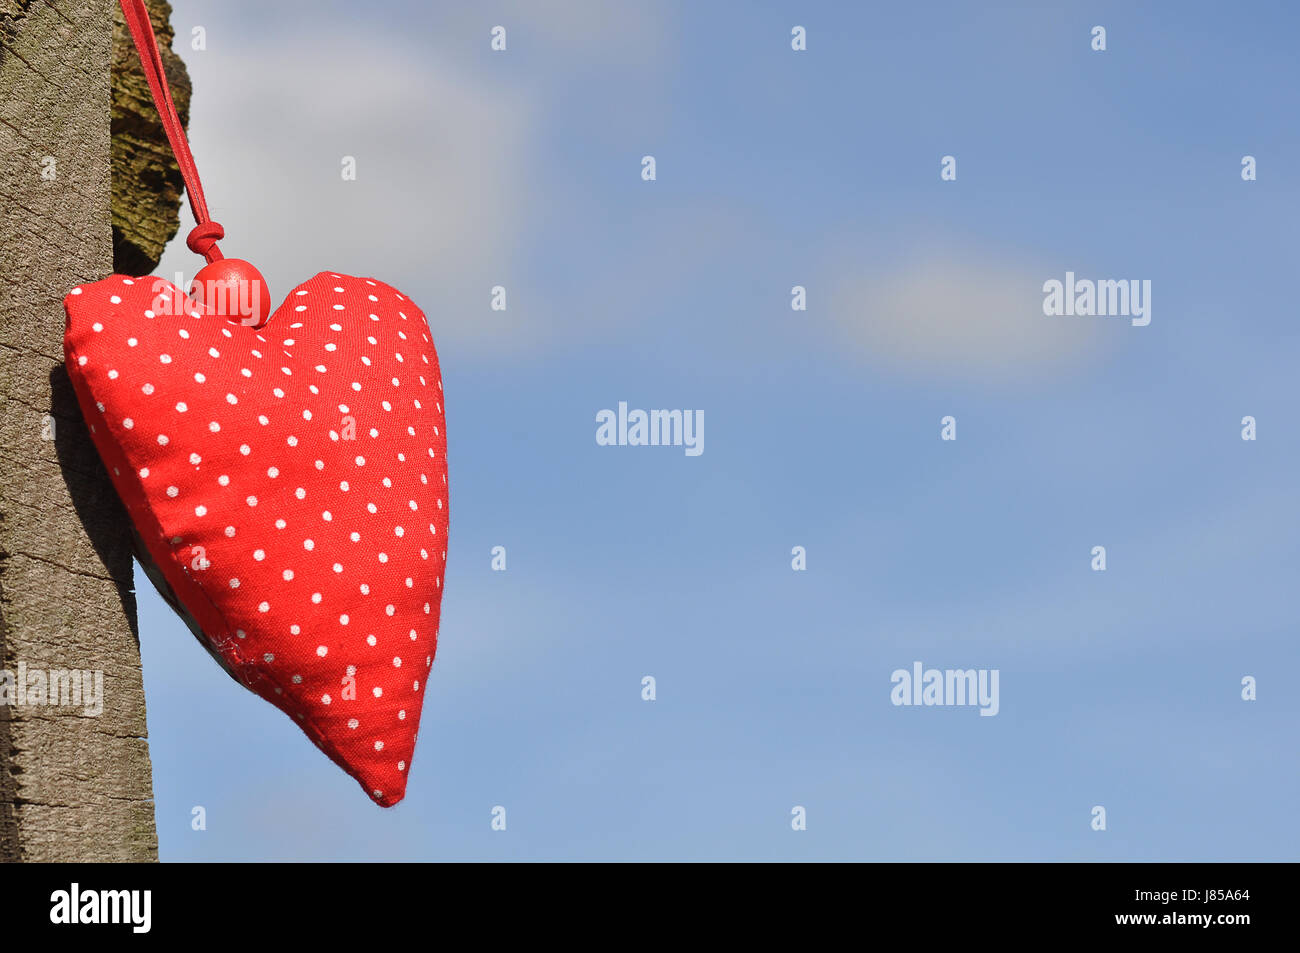 red fabric heart Stock Photo